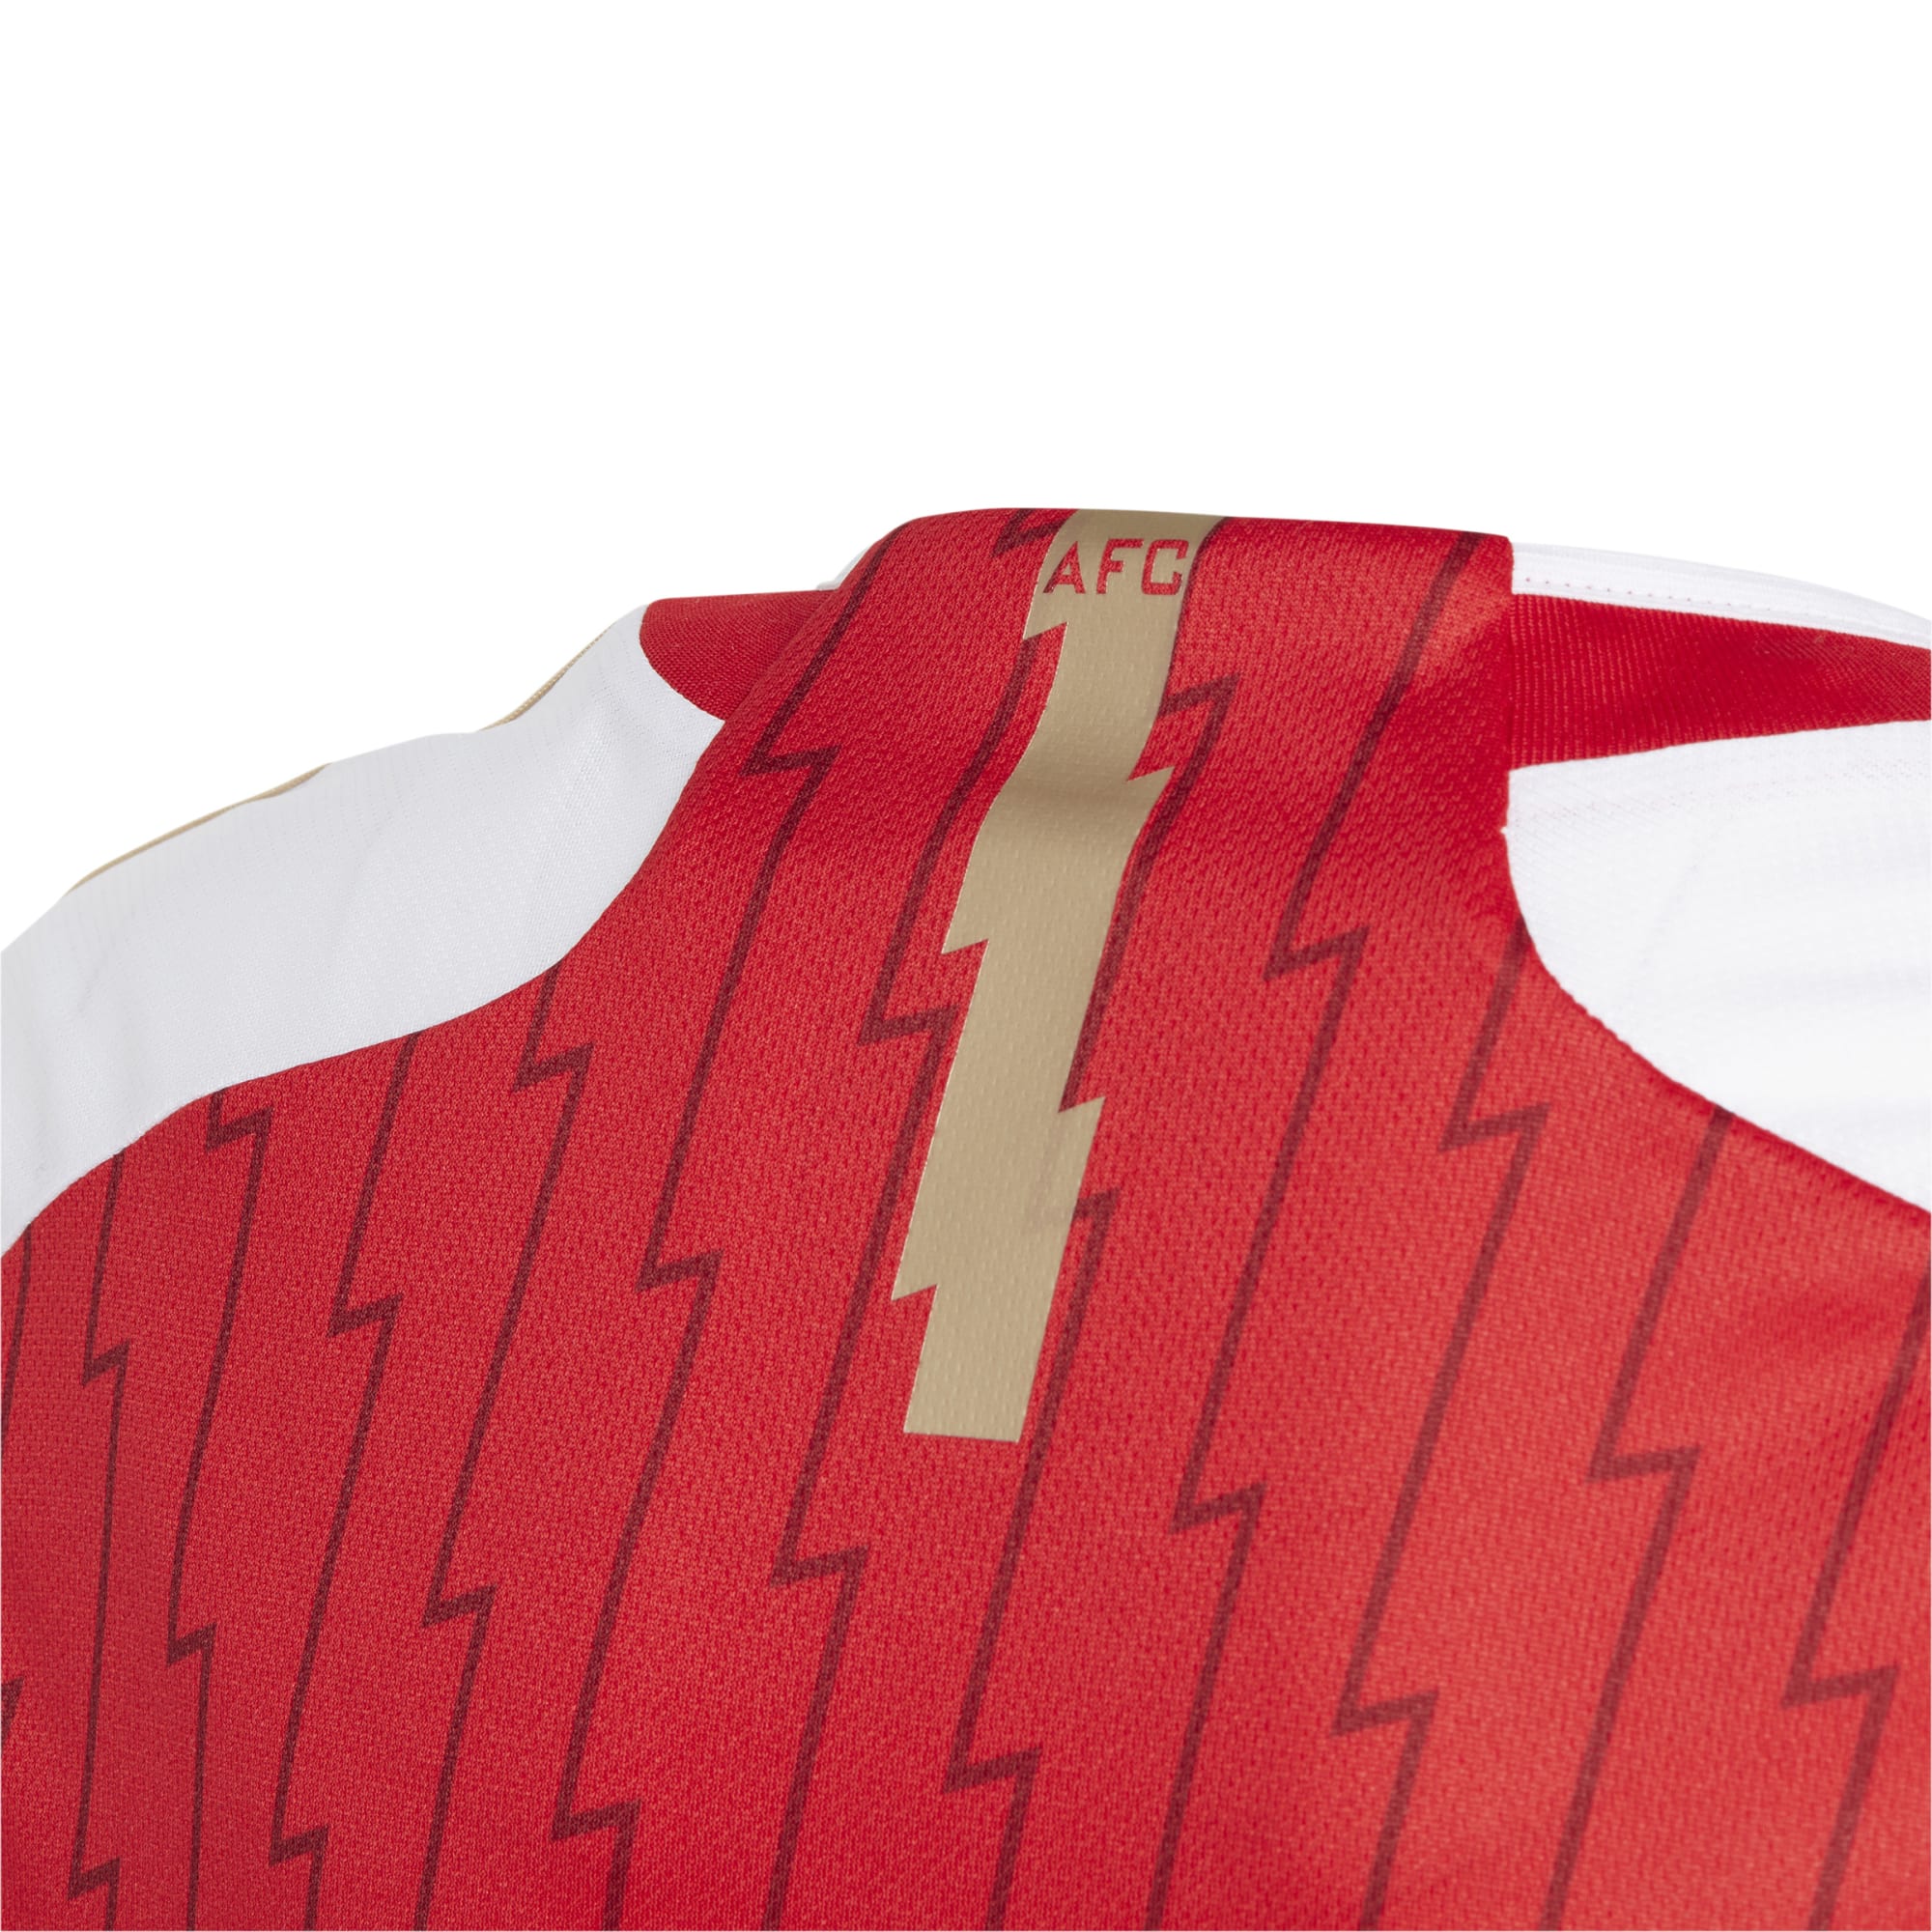 Adidas Arsenal Youth Home Jersey 23/24 - HZ2133